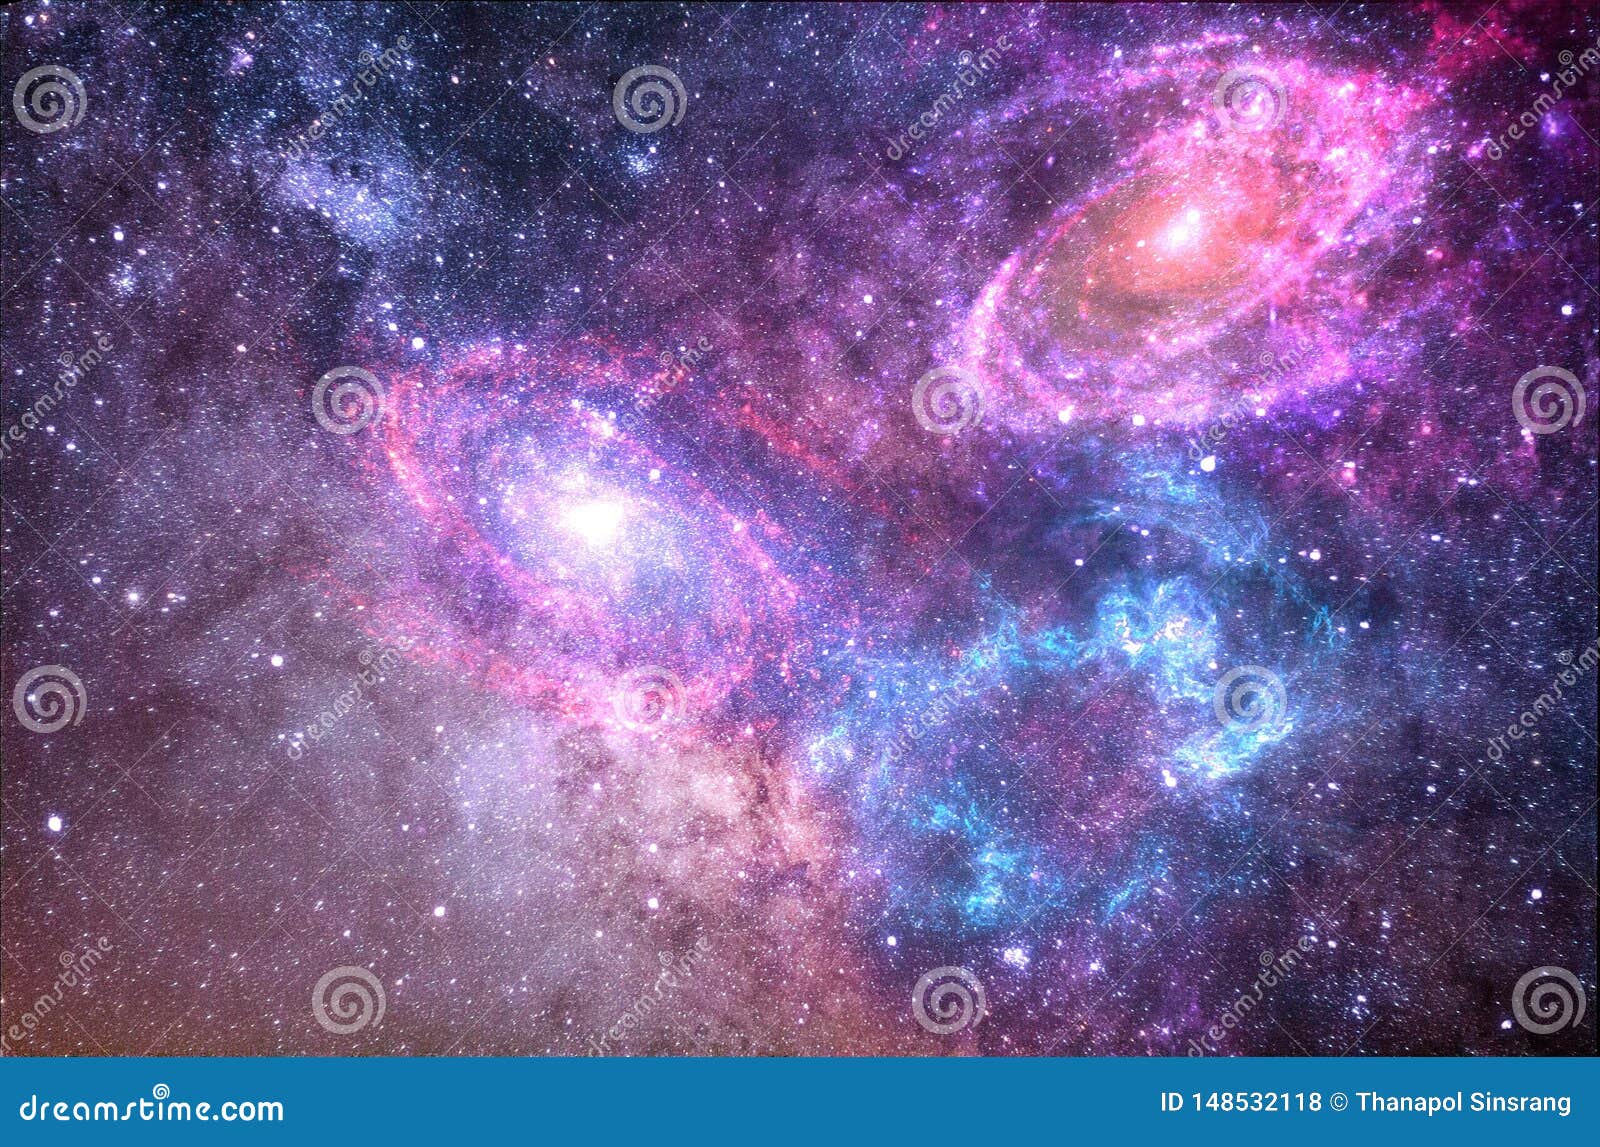 Planets Galaxy Universe Starry Night Sky Milky Way Galaxy With